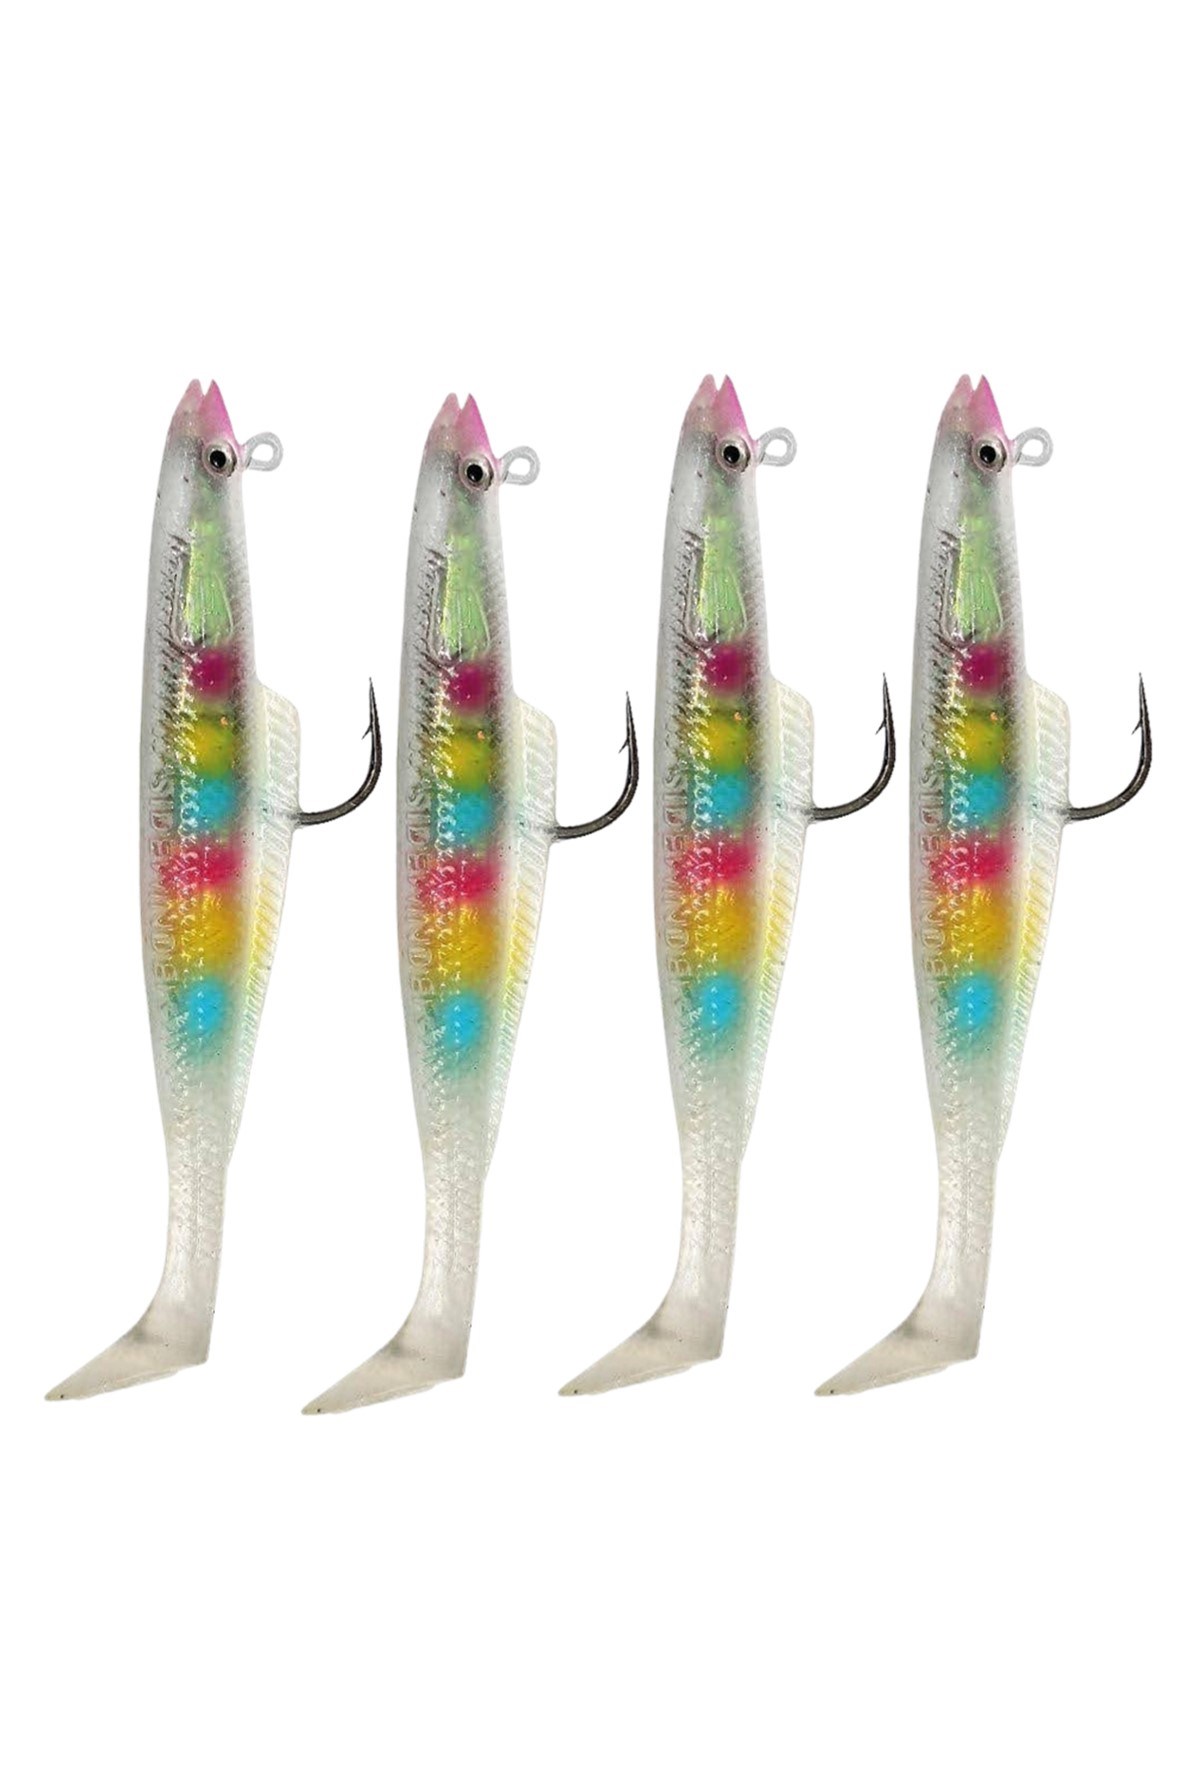 Candy King Sandeel 4 10g Fishing Lures 4-Pack